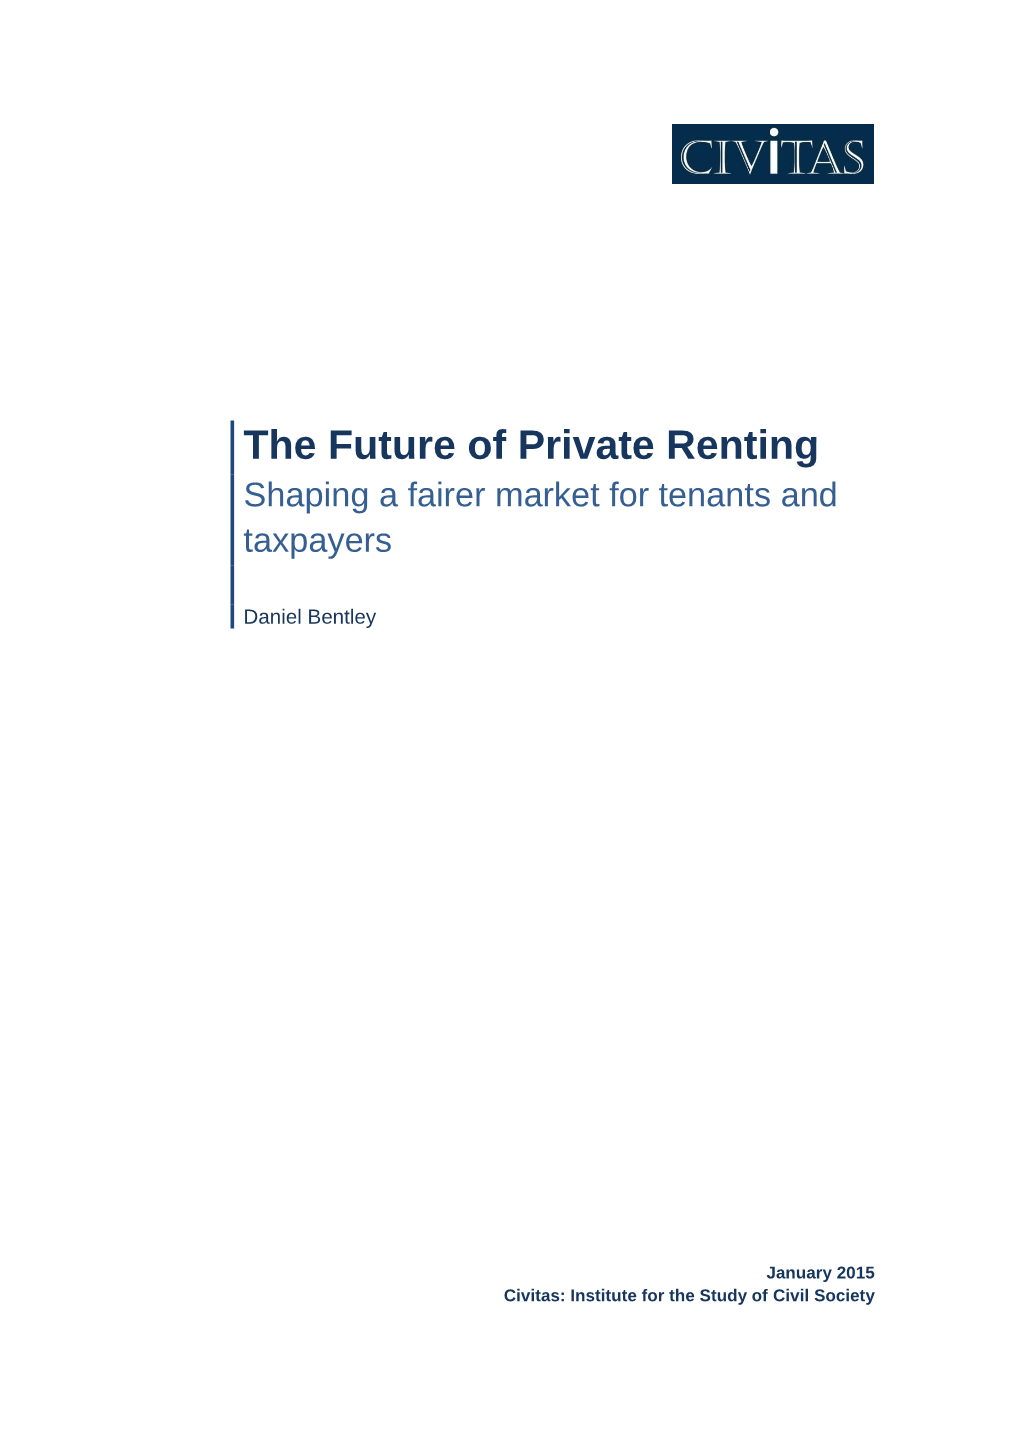 The Future of Private Renting Shaping a Fairer Market for Tenants and Taxpayers